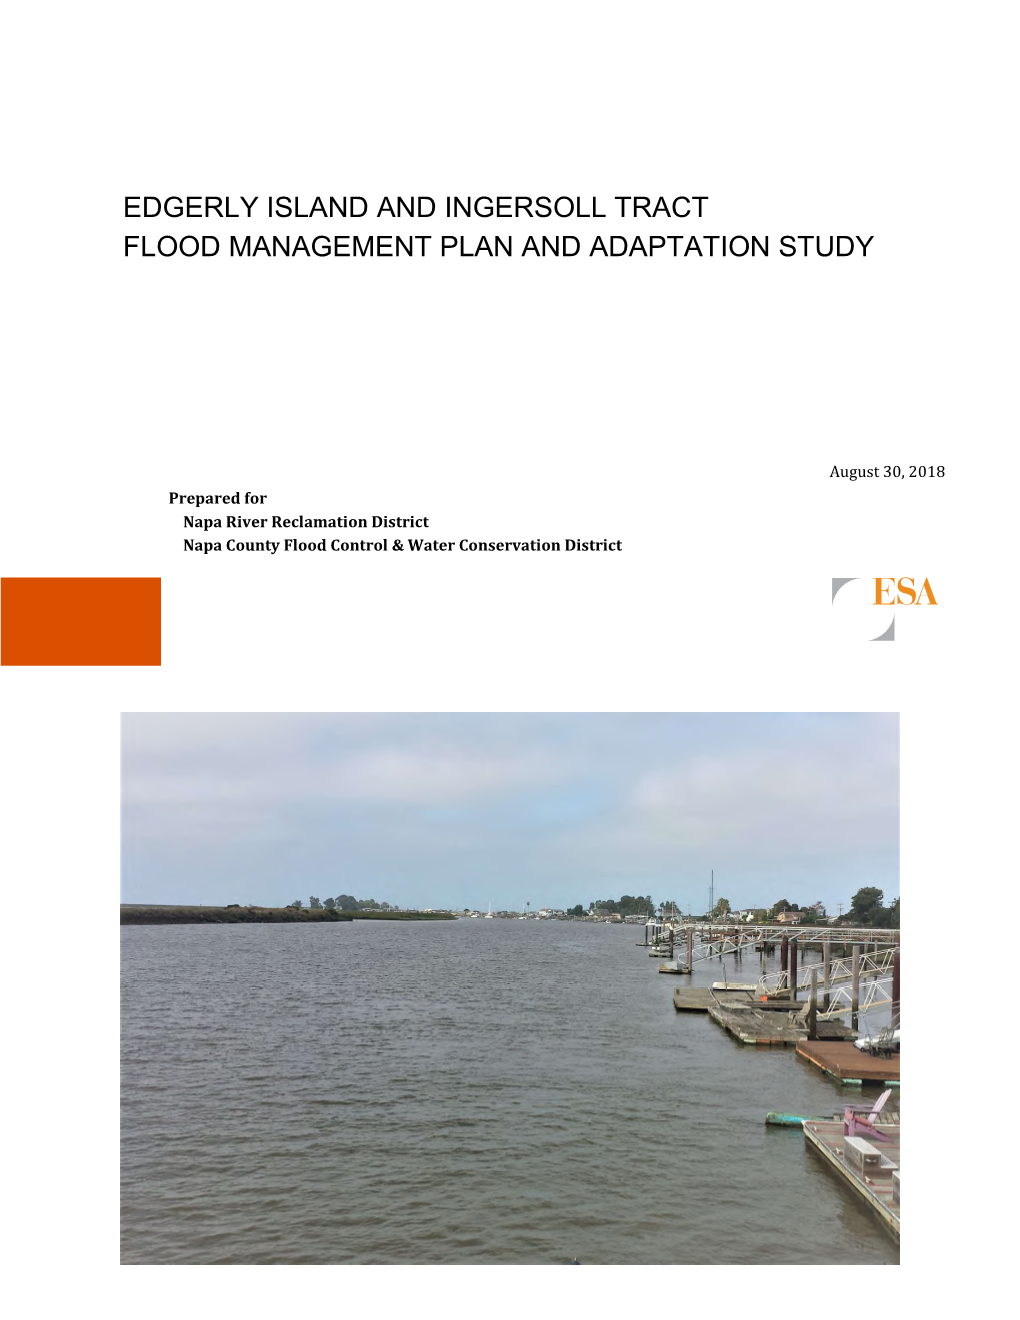 Edgerly Island and Ingersoll Tract Flood Management Plan and Adaptation Study 8/30/2018